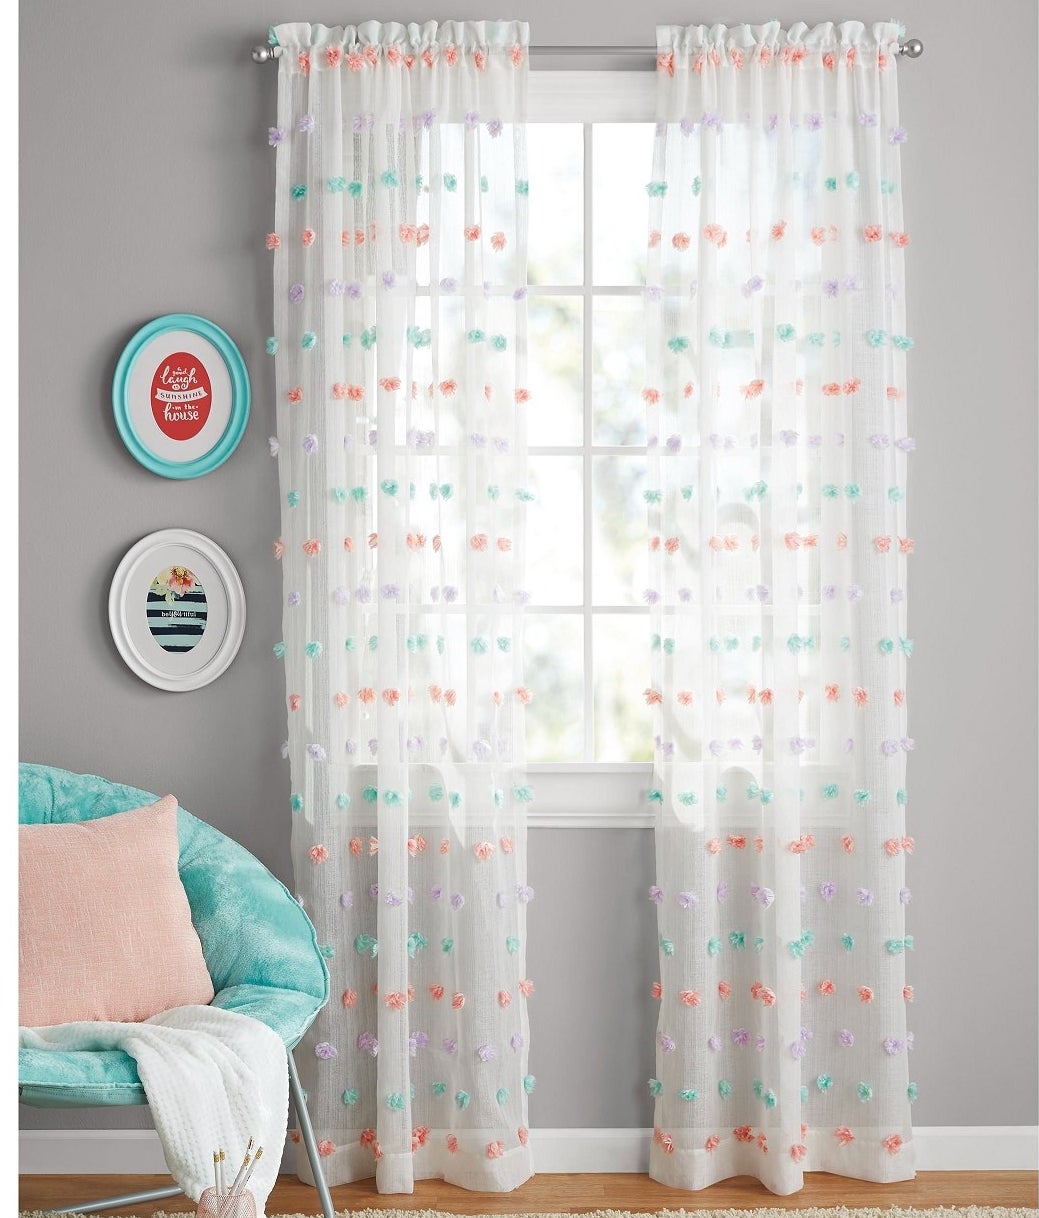 The curtains hung up in a pastel room